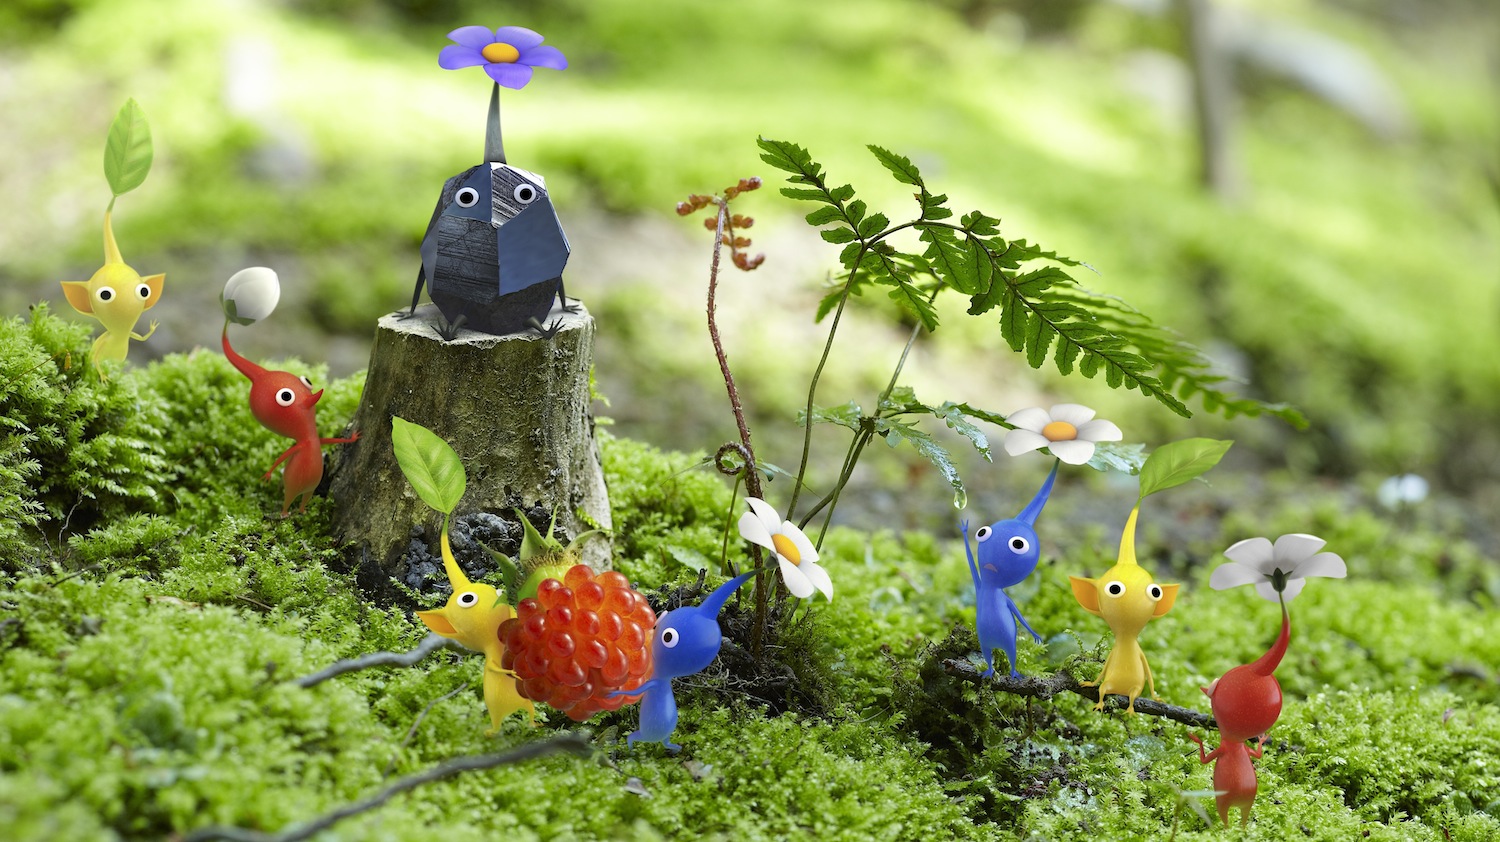 “Pikmin 4” Confirmed to Be in Development - Also Very Close to Completion